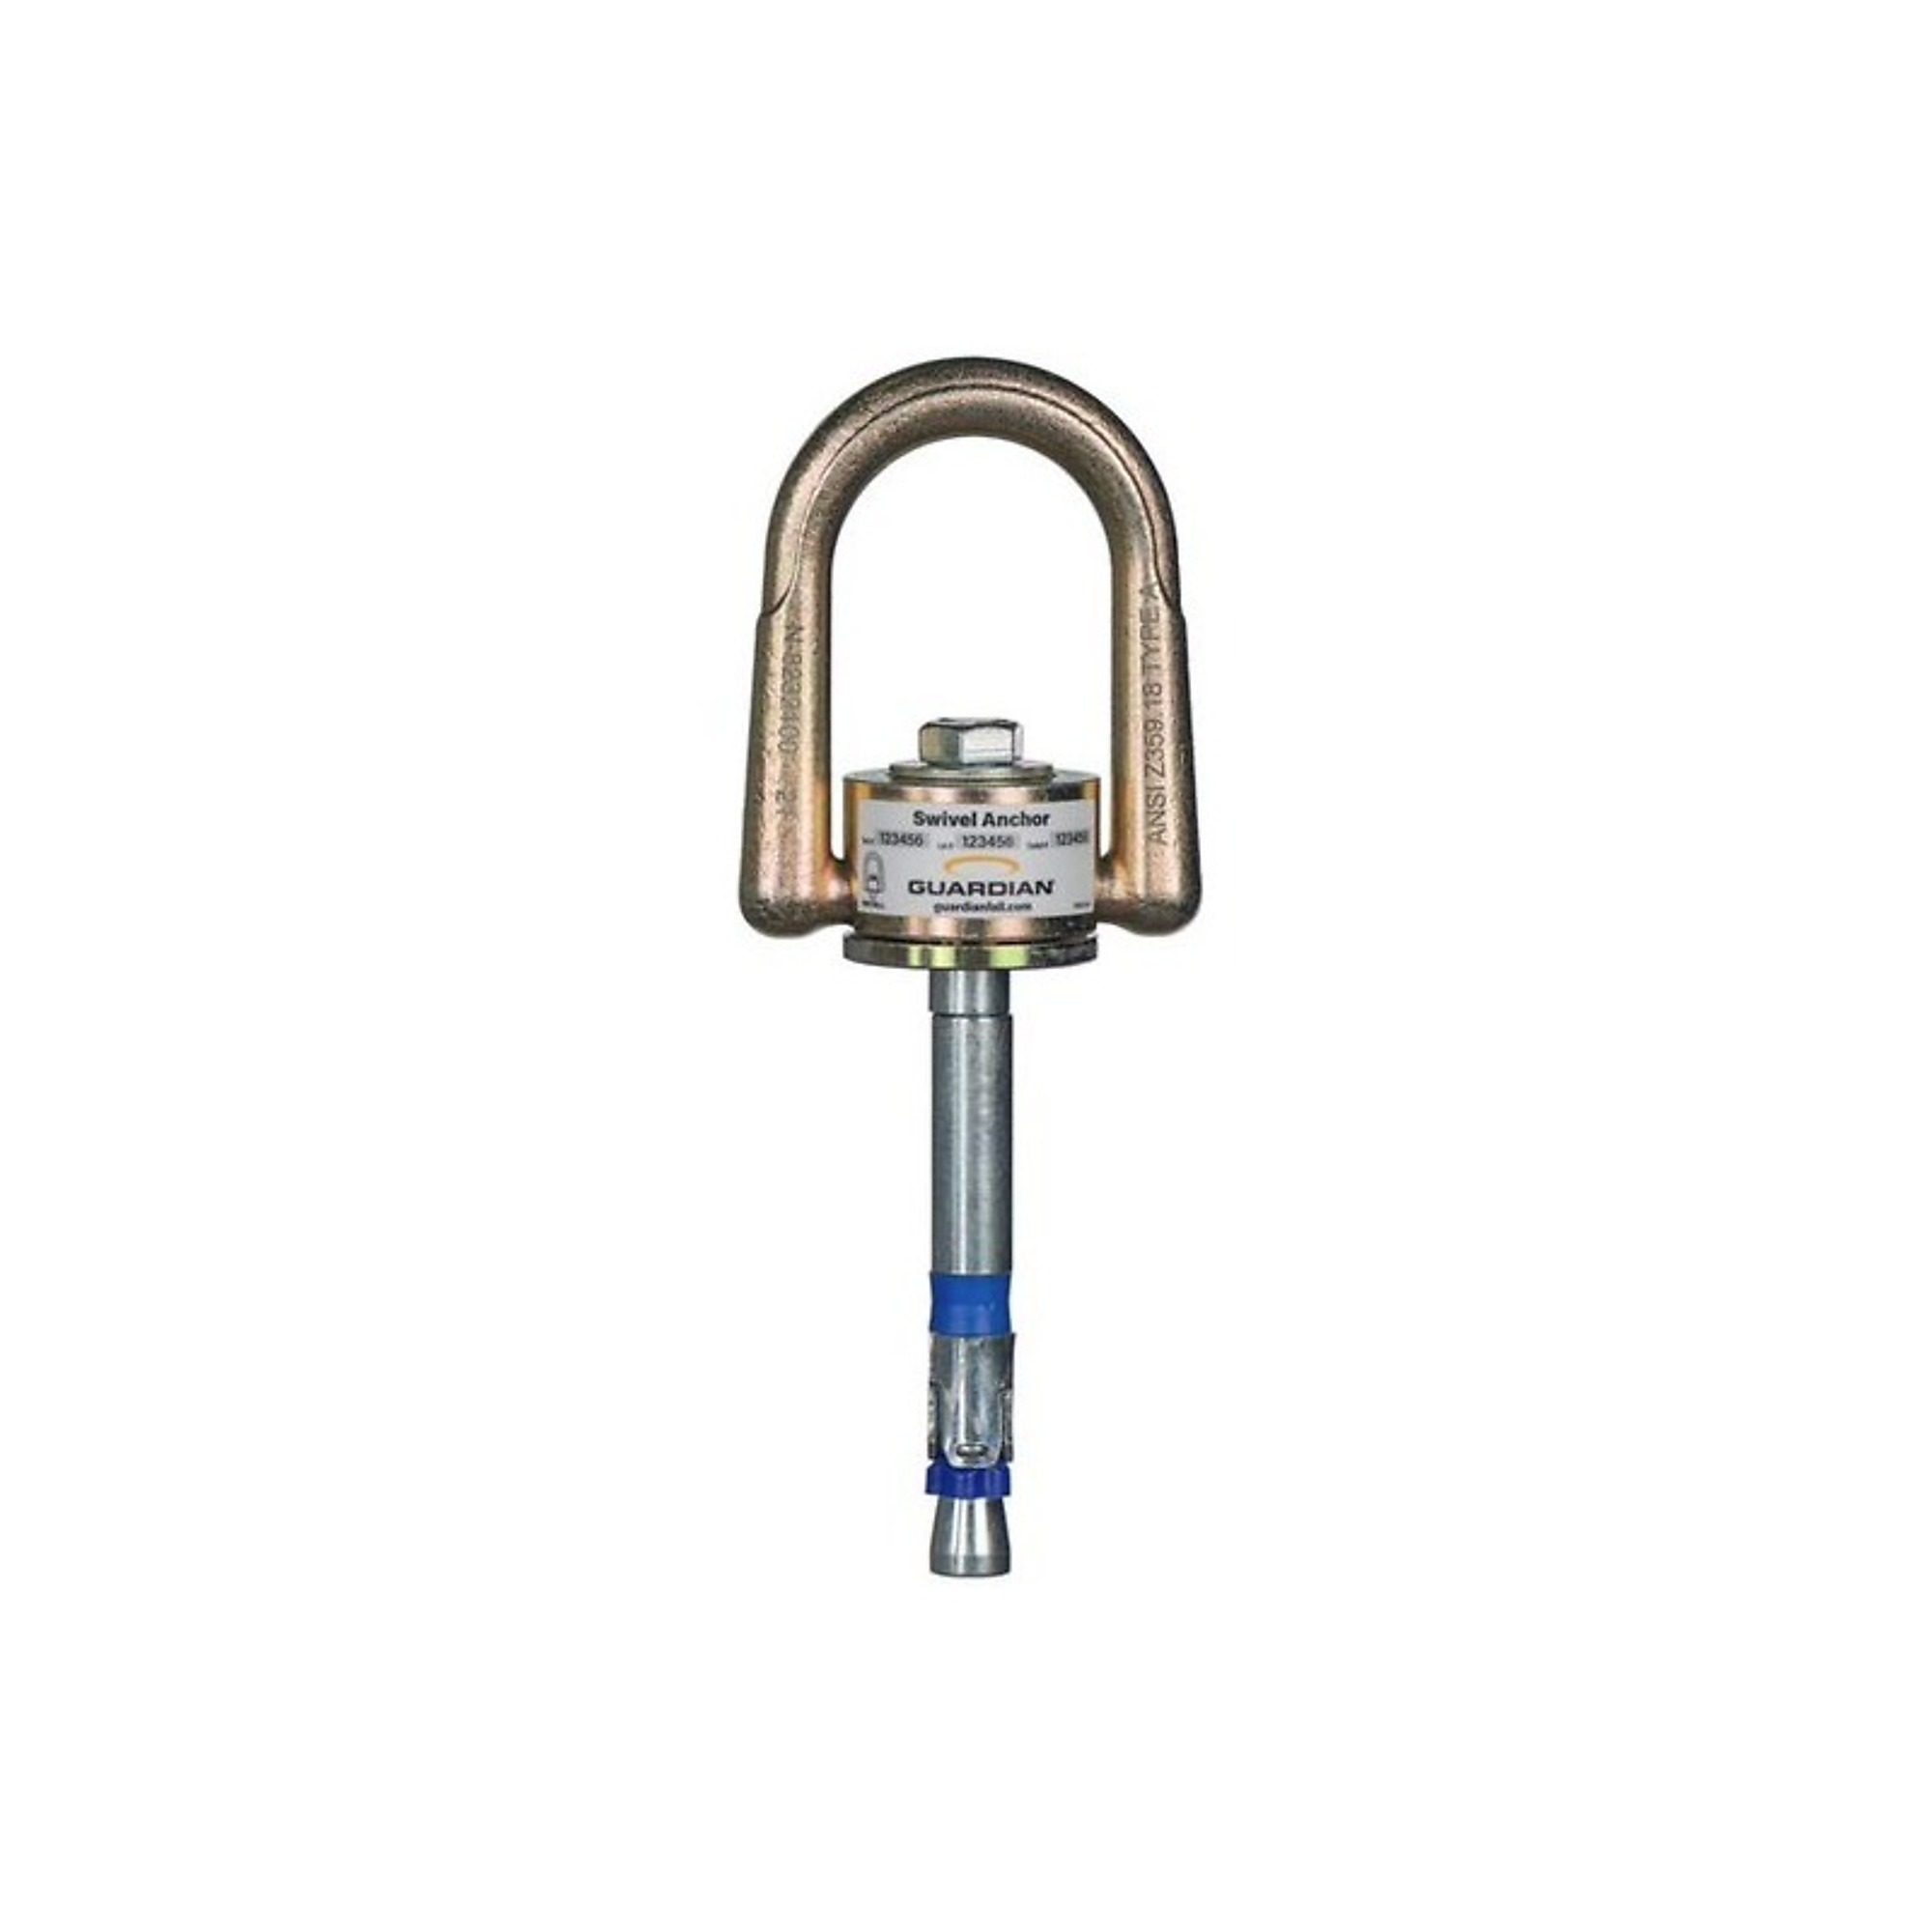 Guardian, Swivel Concrete Anchor, 10k, 6Inch Expansion Anchor, Included (qty.) 1 Model 10010